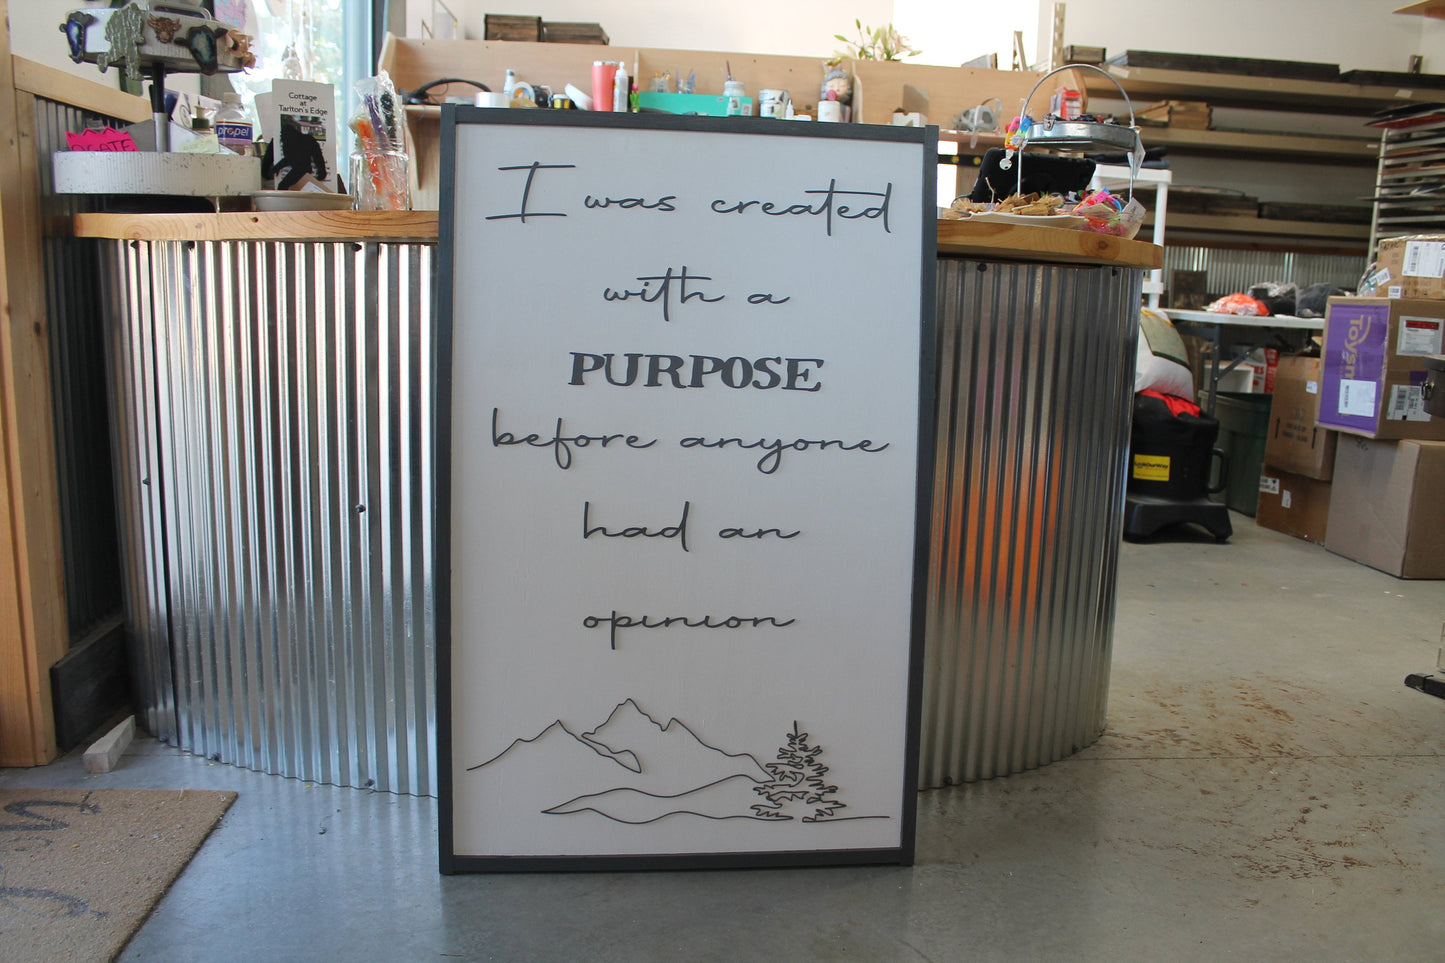 Purpose Created Before anyone had an opinion Inspire Mountains Kids Room kids Decor Happy Wooden Handmade Home decor Line Art